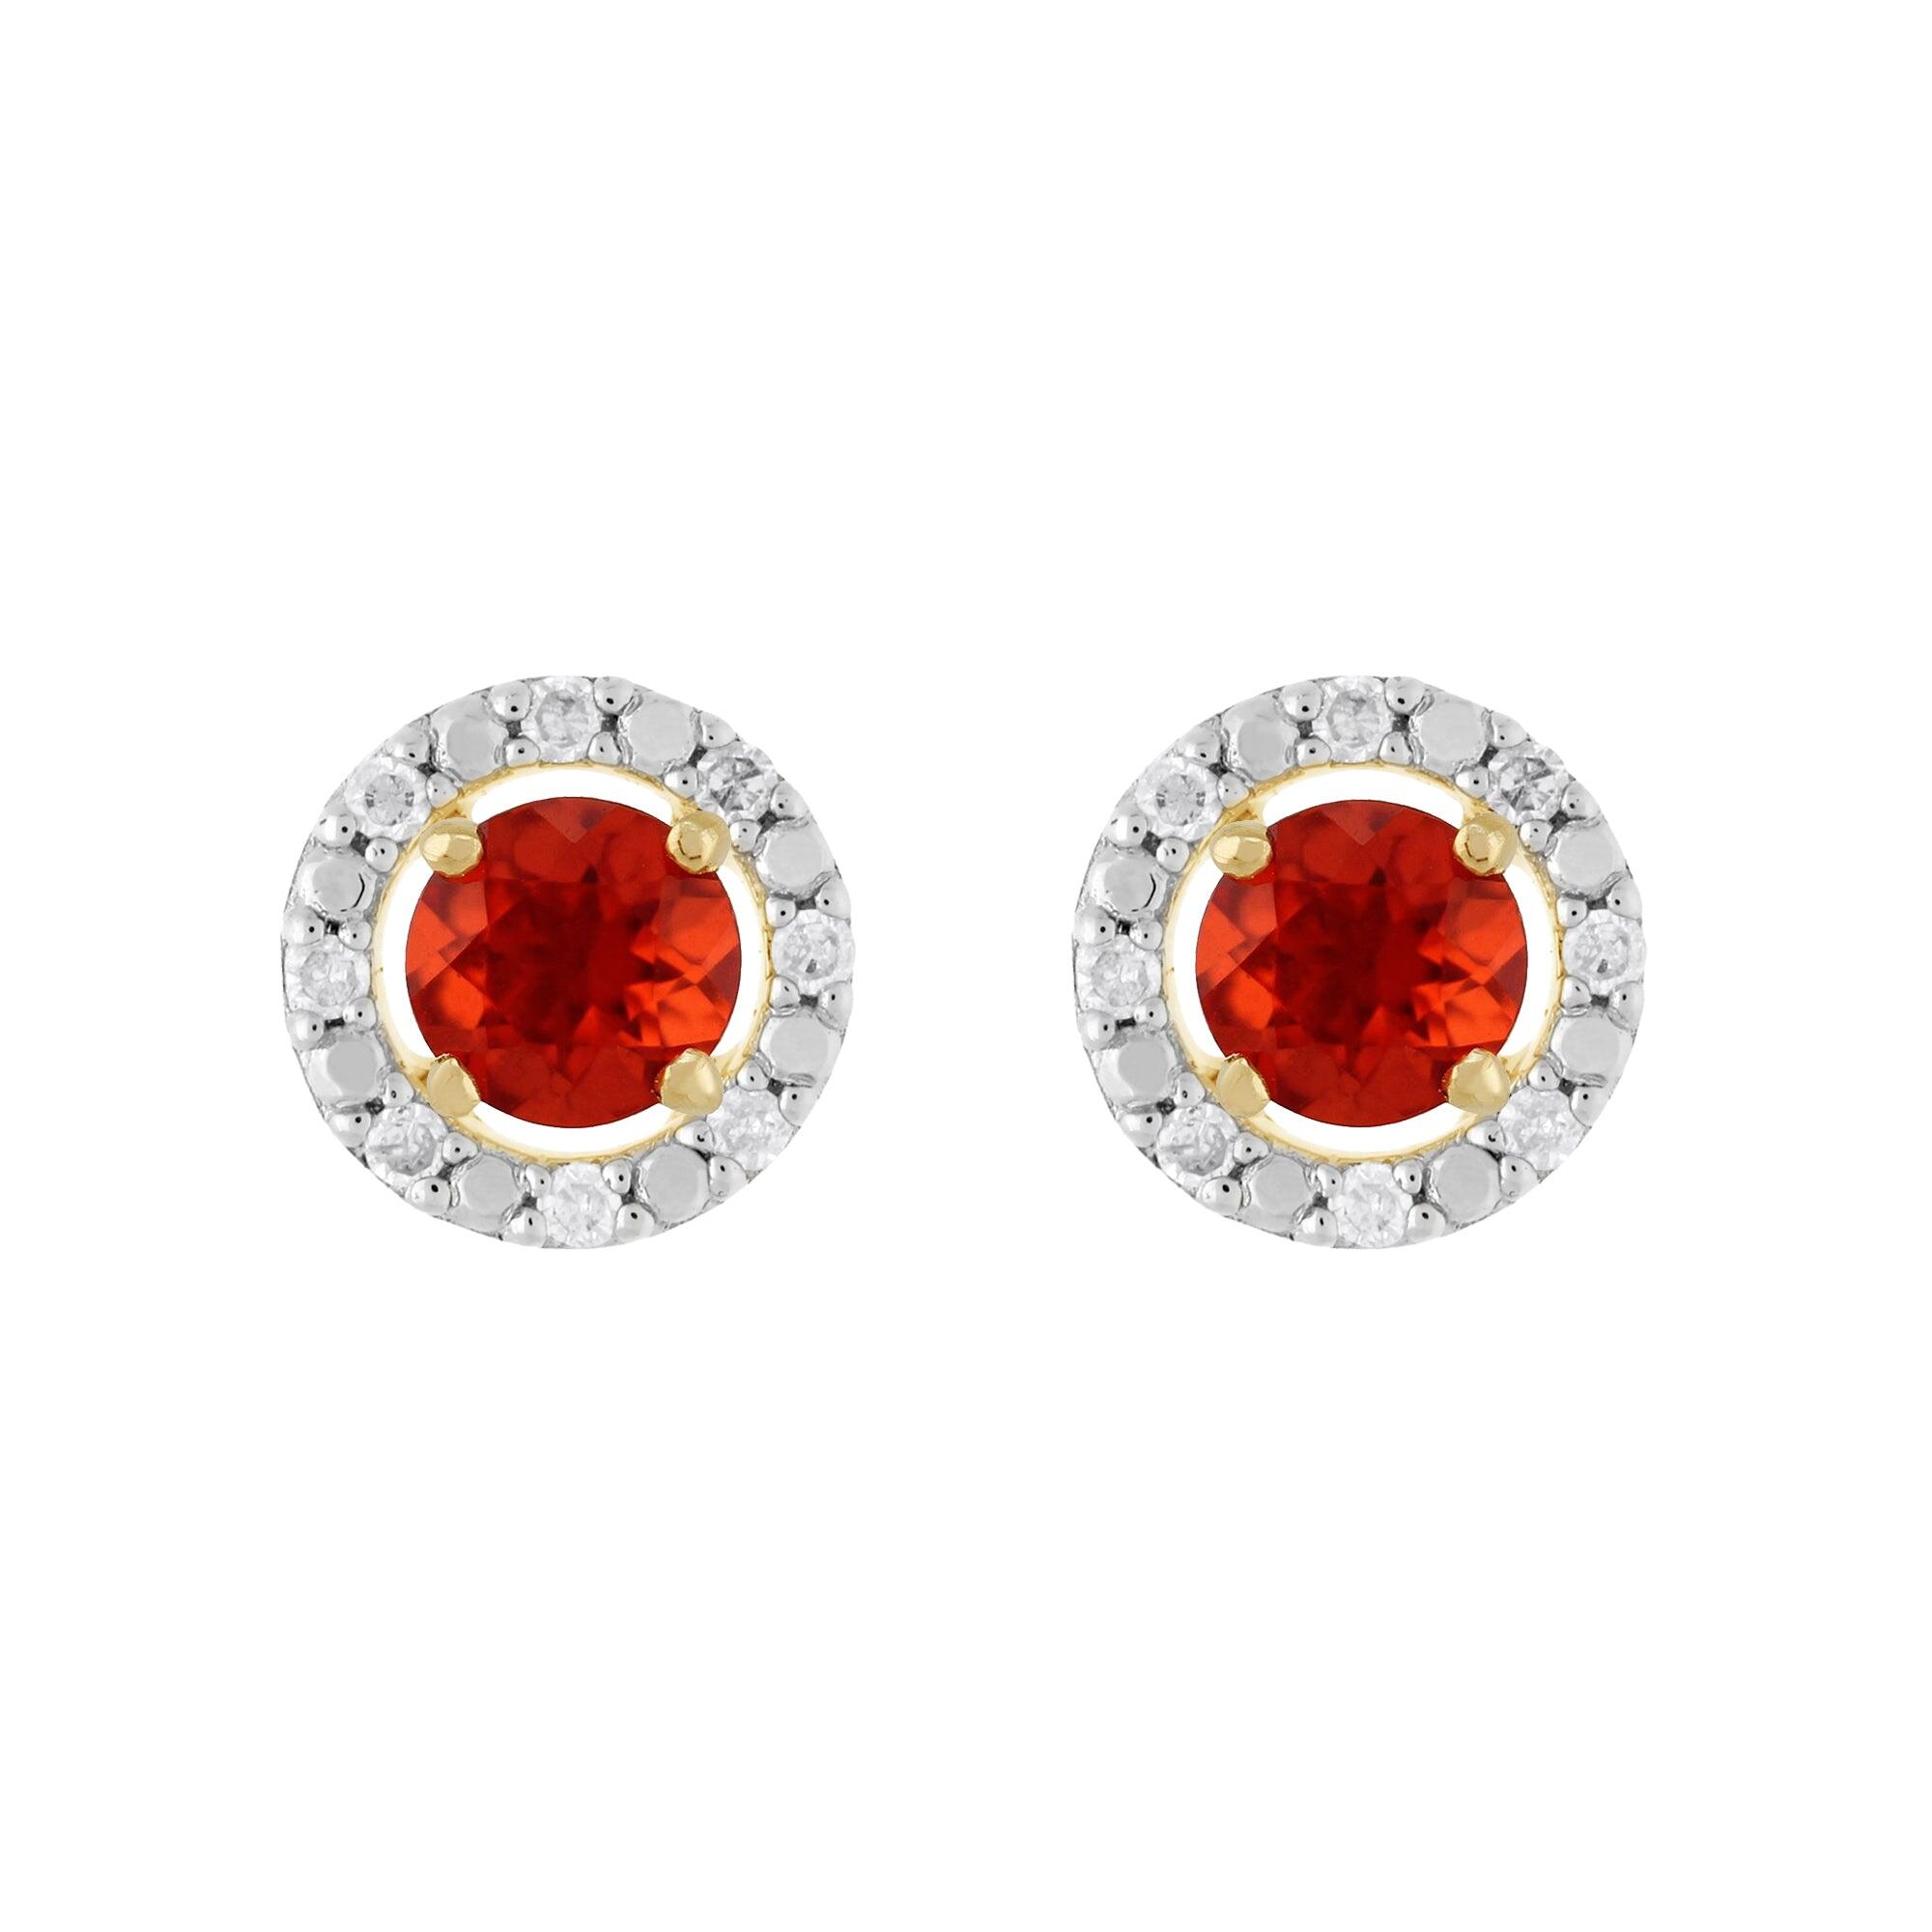 Classic Round Fire Opal Stud Earrings with Detachable Diamond Round Earrings Jacket Set in 9ct Yellow Gold